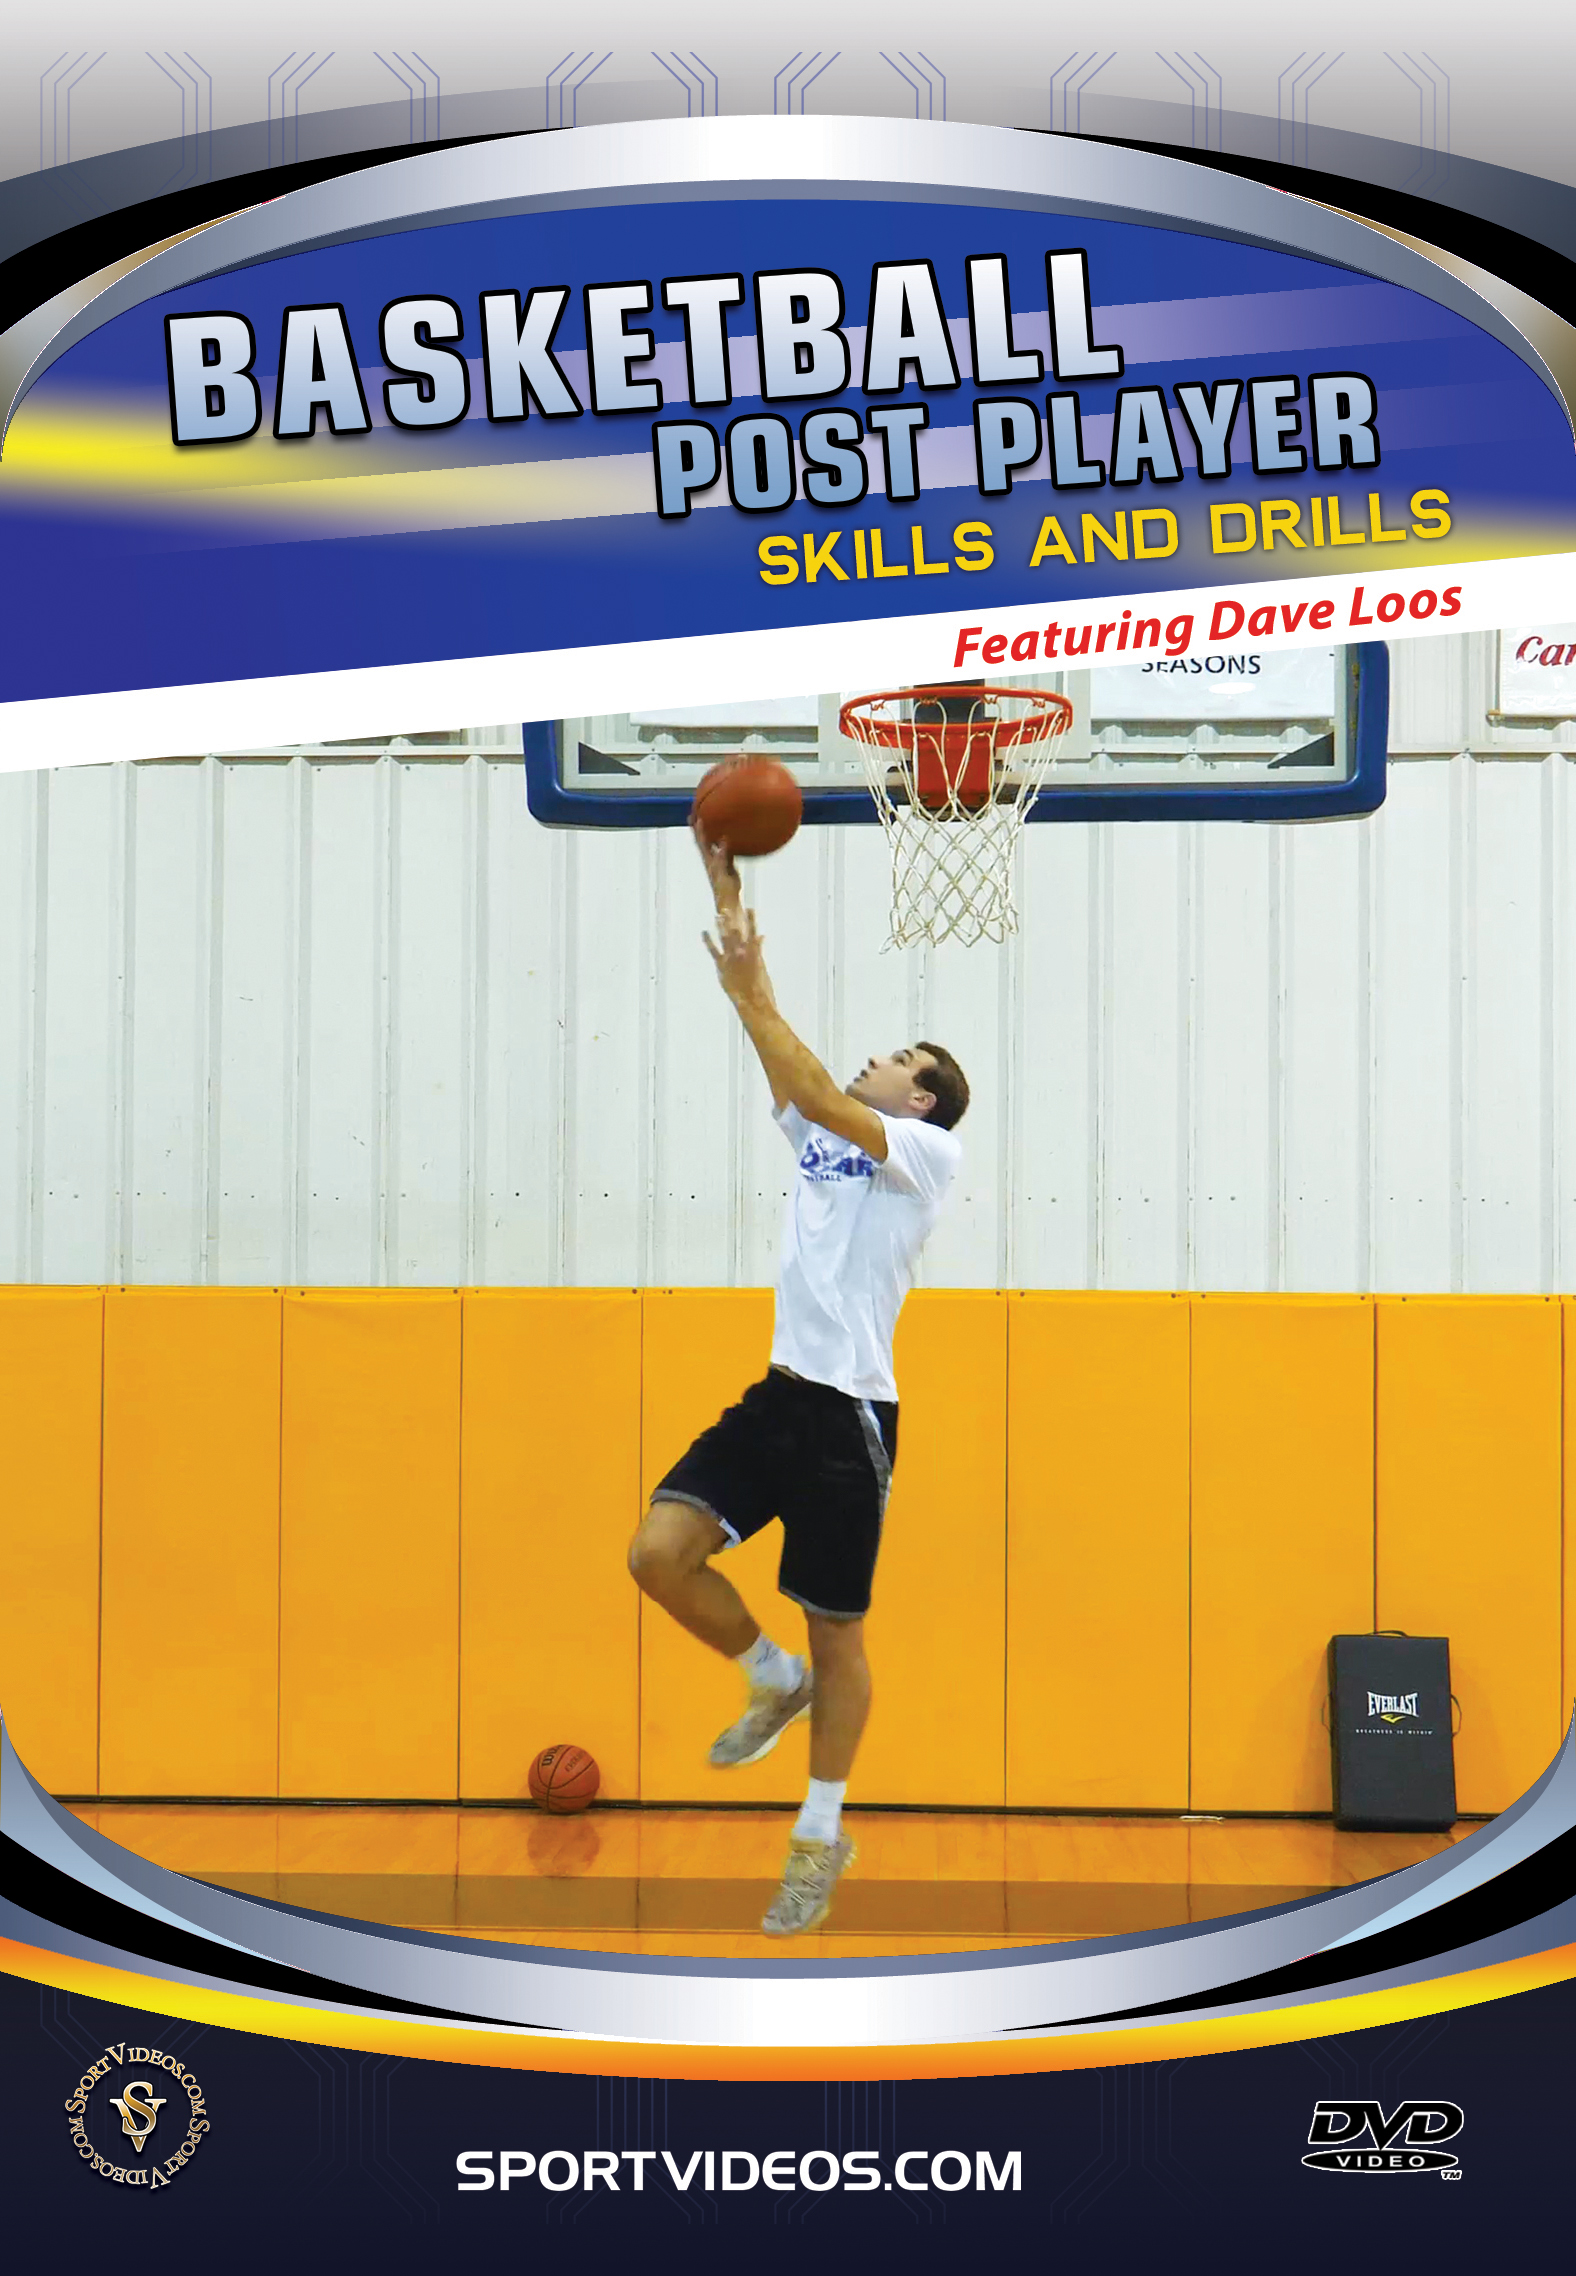 Basketball Post Player Skills and Drills DVD or Download - 2018 Title